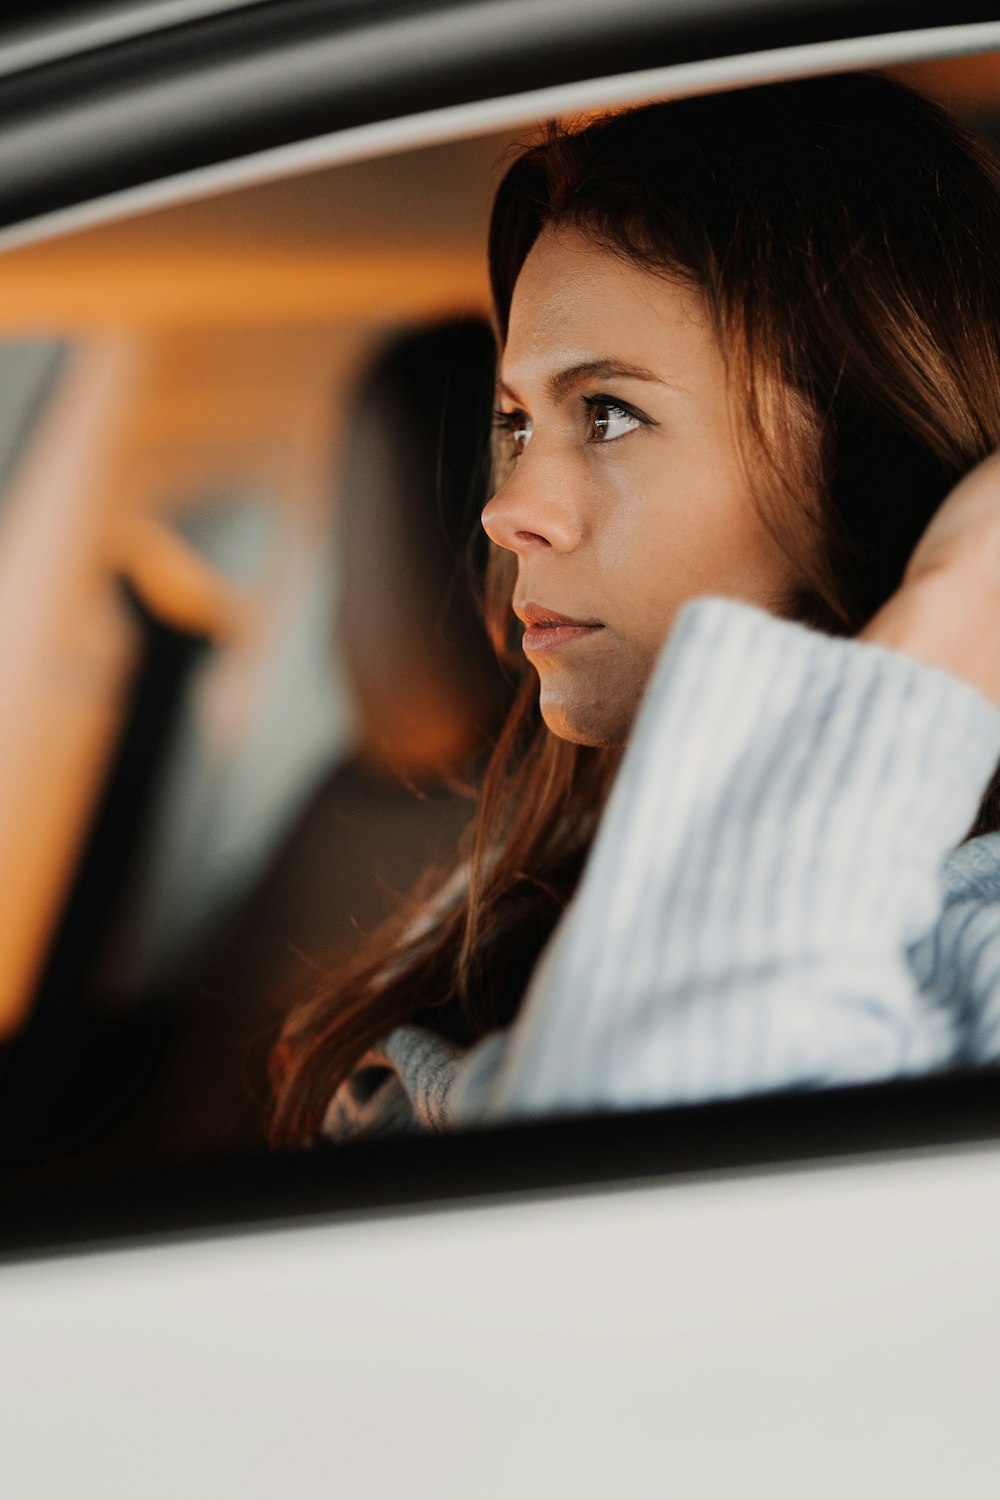 a woman sitting in a car looking out the window